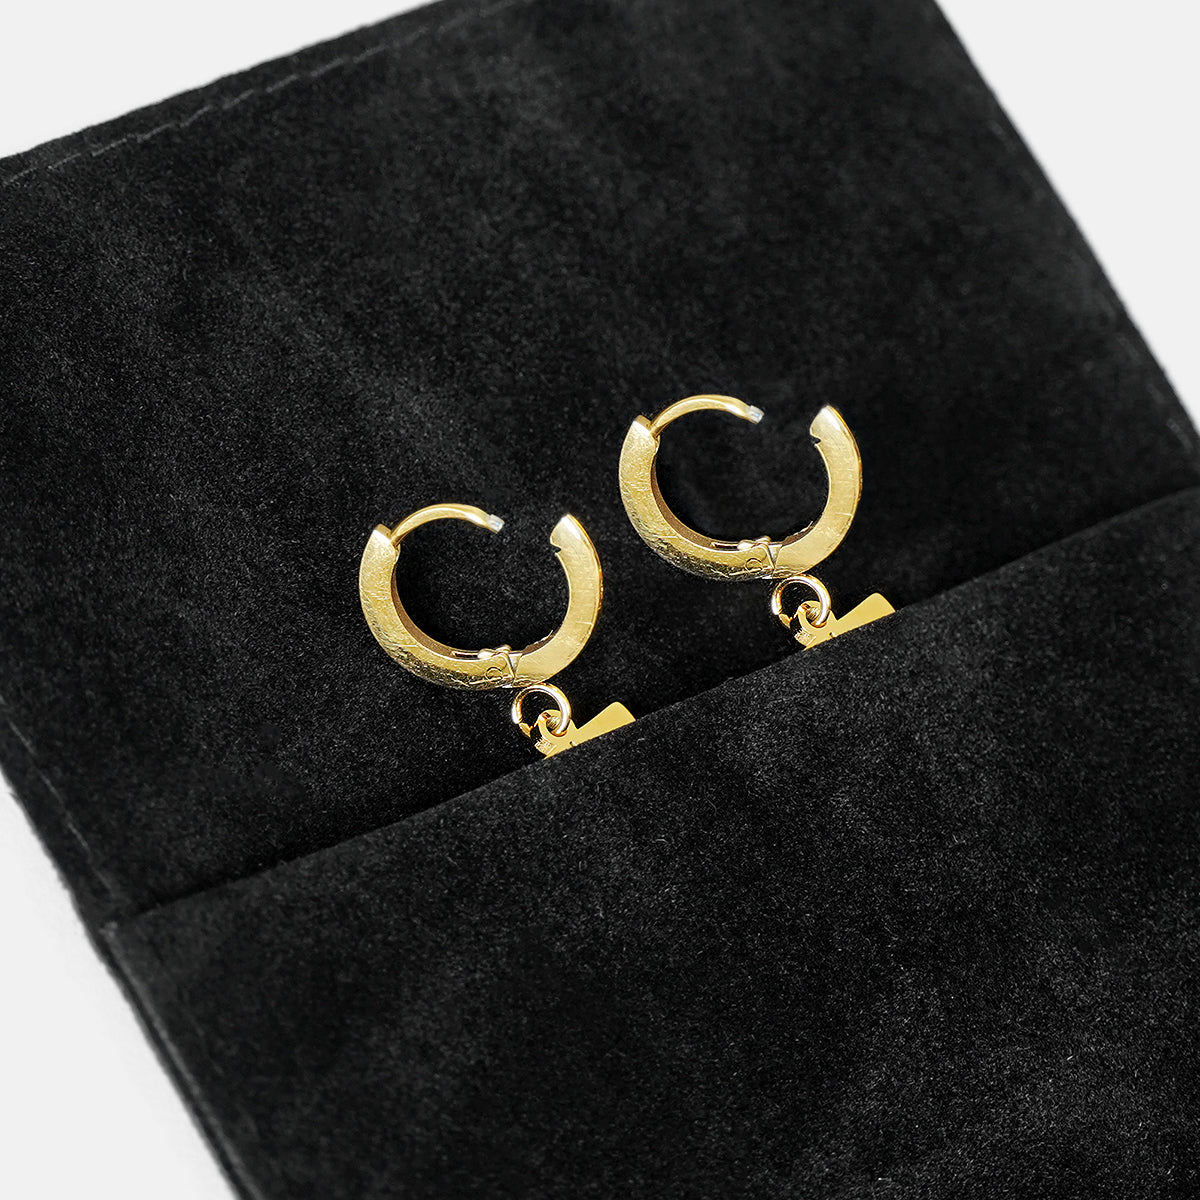 62 Number Earring - Gold Plated Stainless Steel